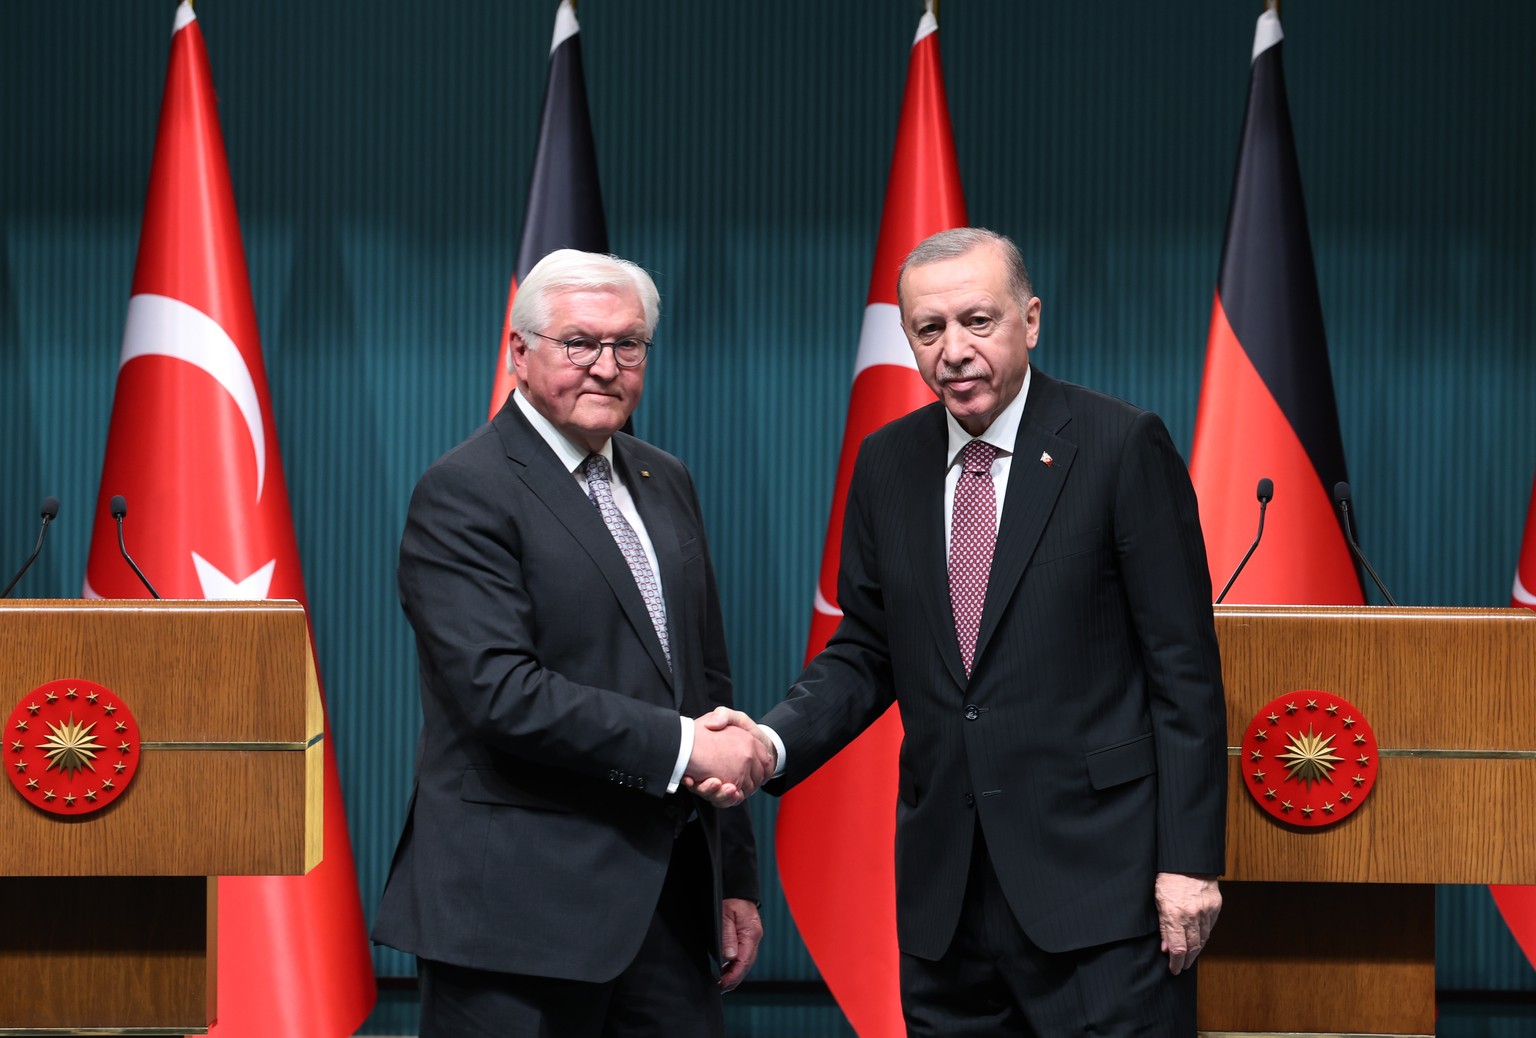 epa11297828 A handout photo made available by the Turkish Presidential press office shows Turkish President Recep Tayyip Erdogan (R) and German President Frank-Walter Steinmeier (L) attending a press  ...